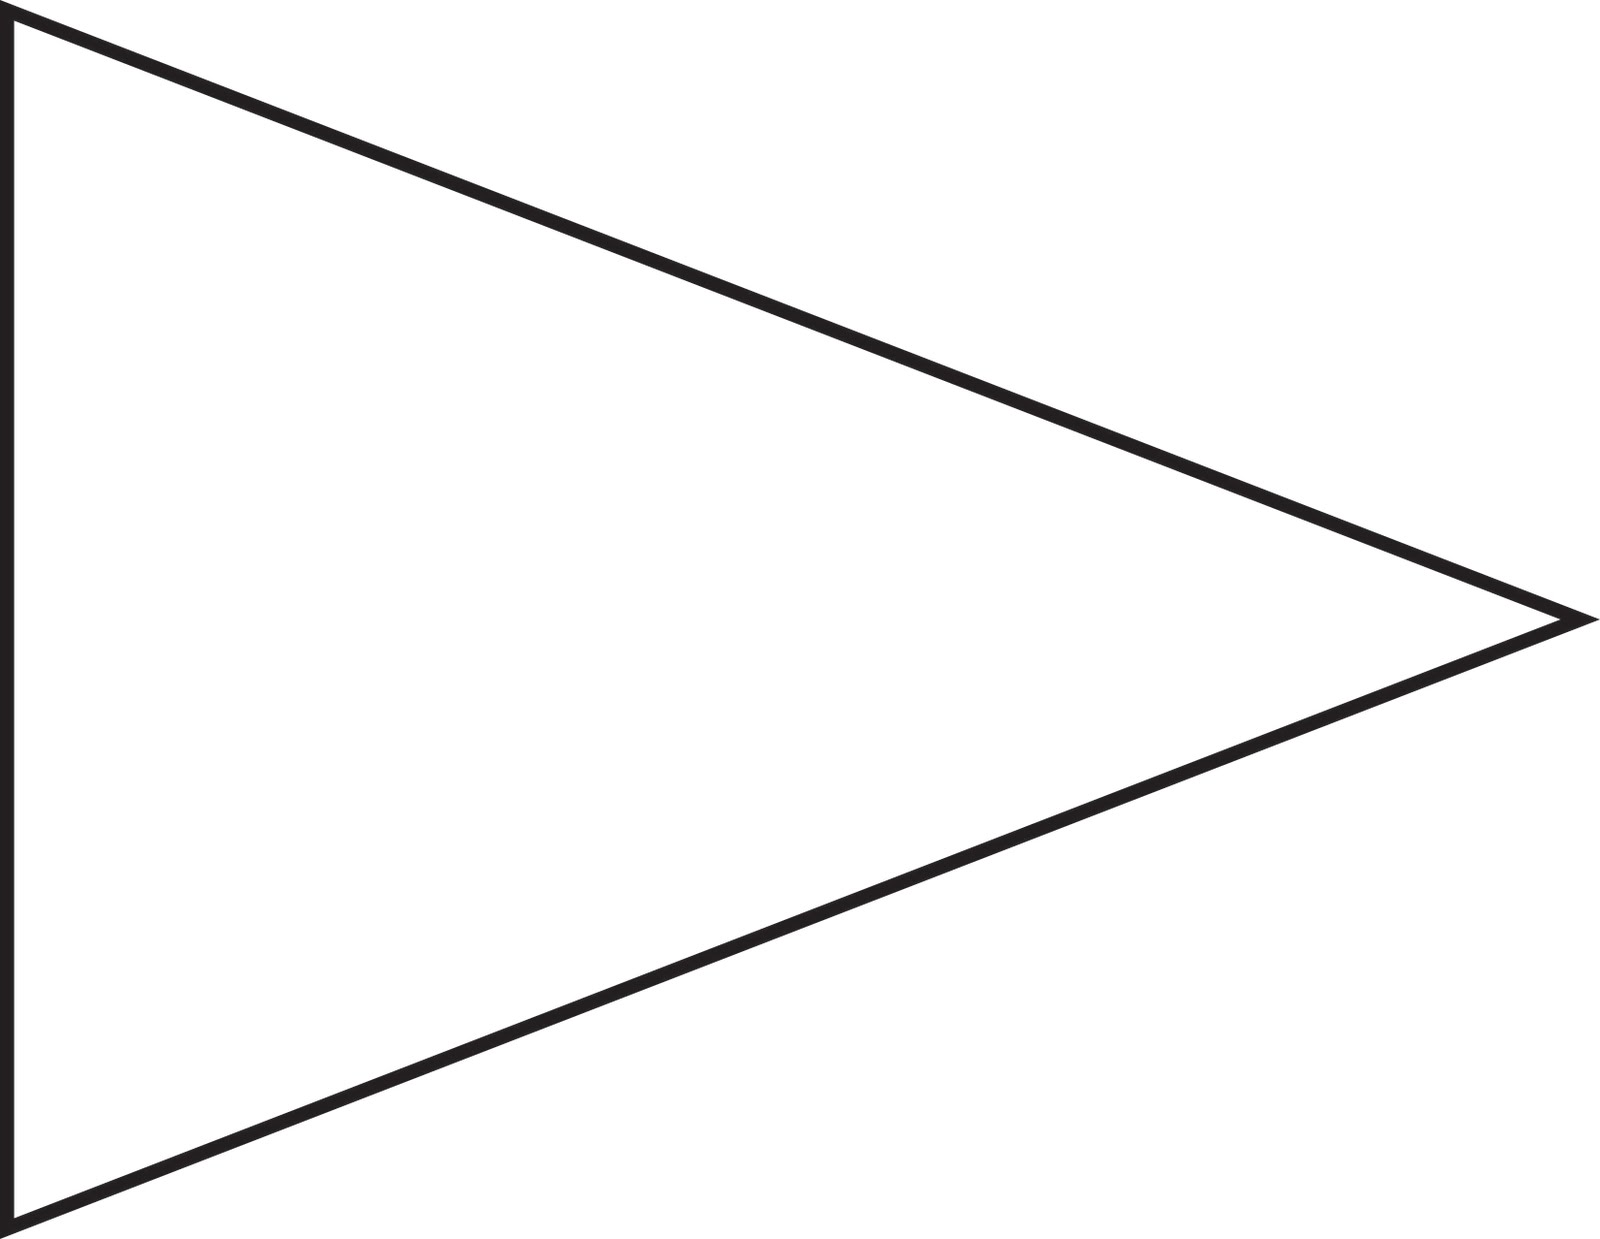 Triangle Flag Banner Clipart - Free Clipart Images